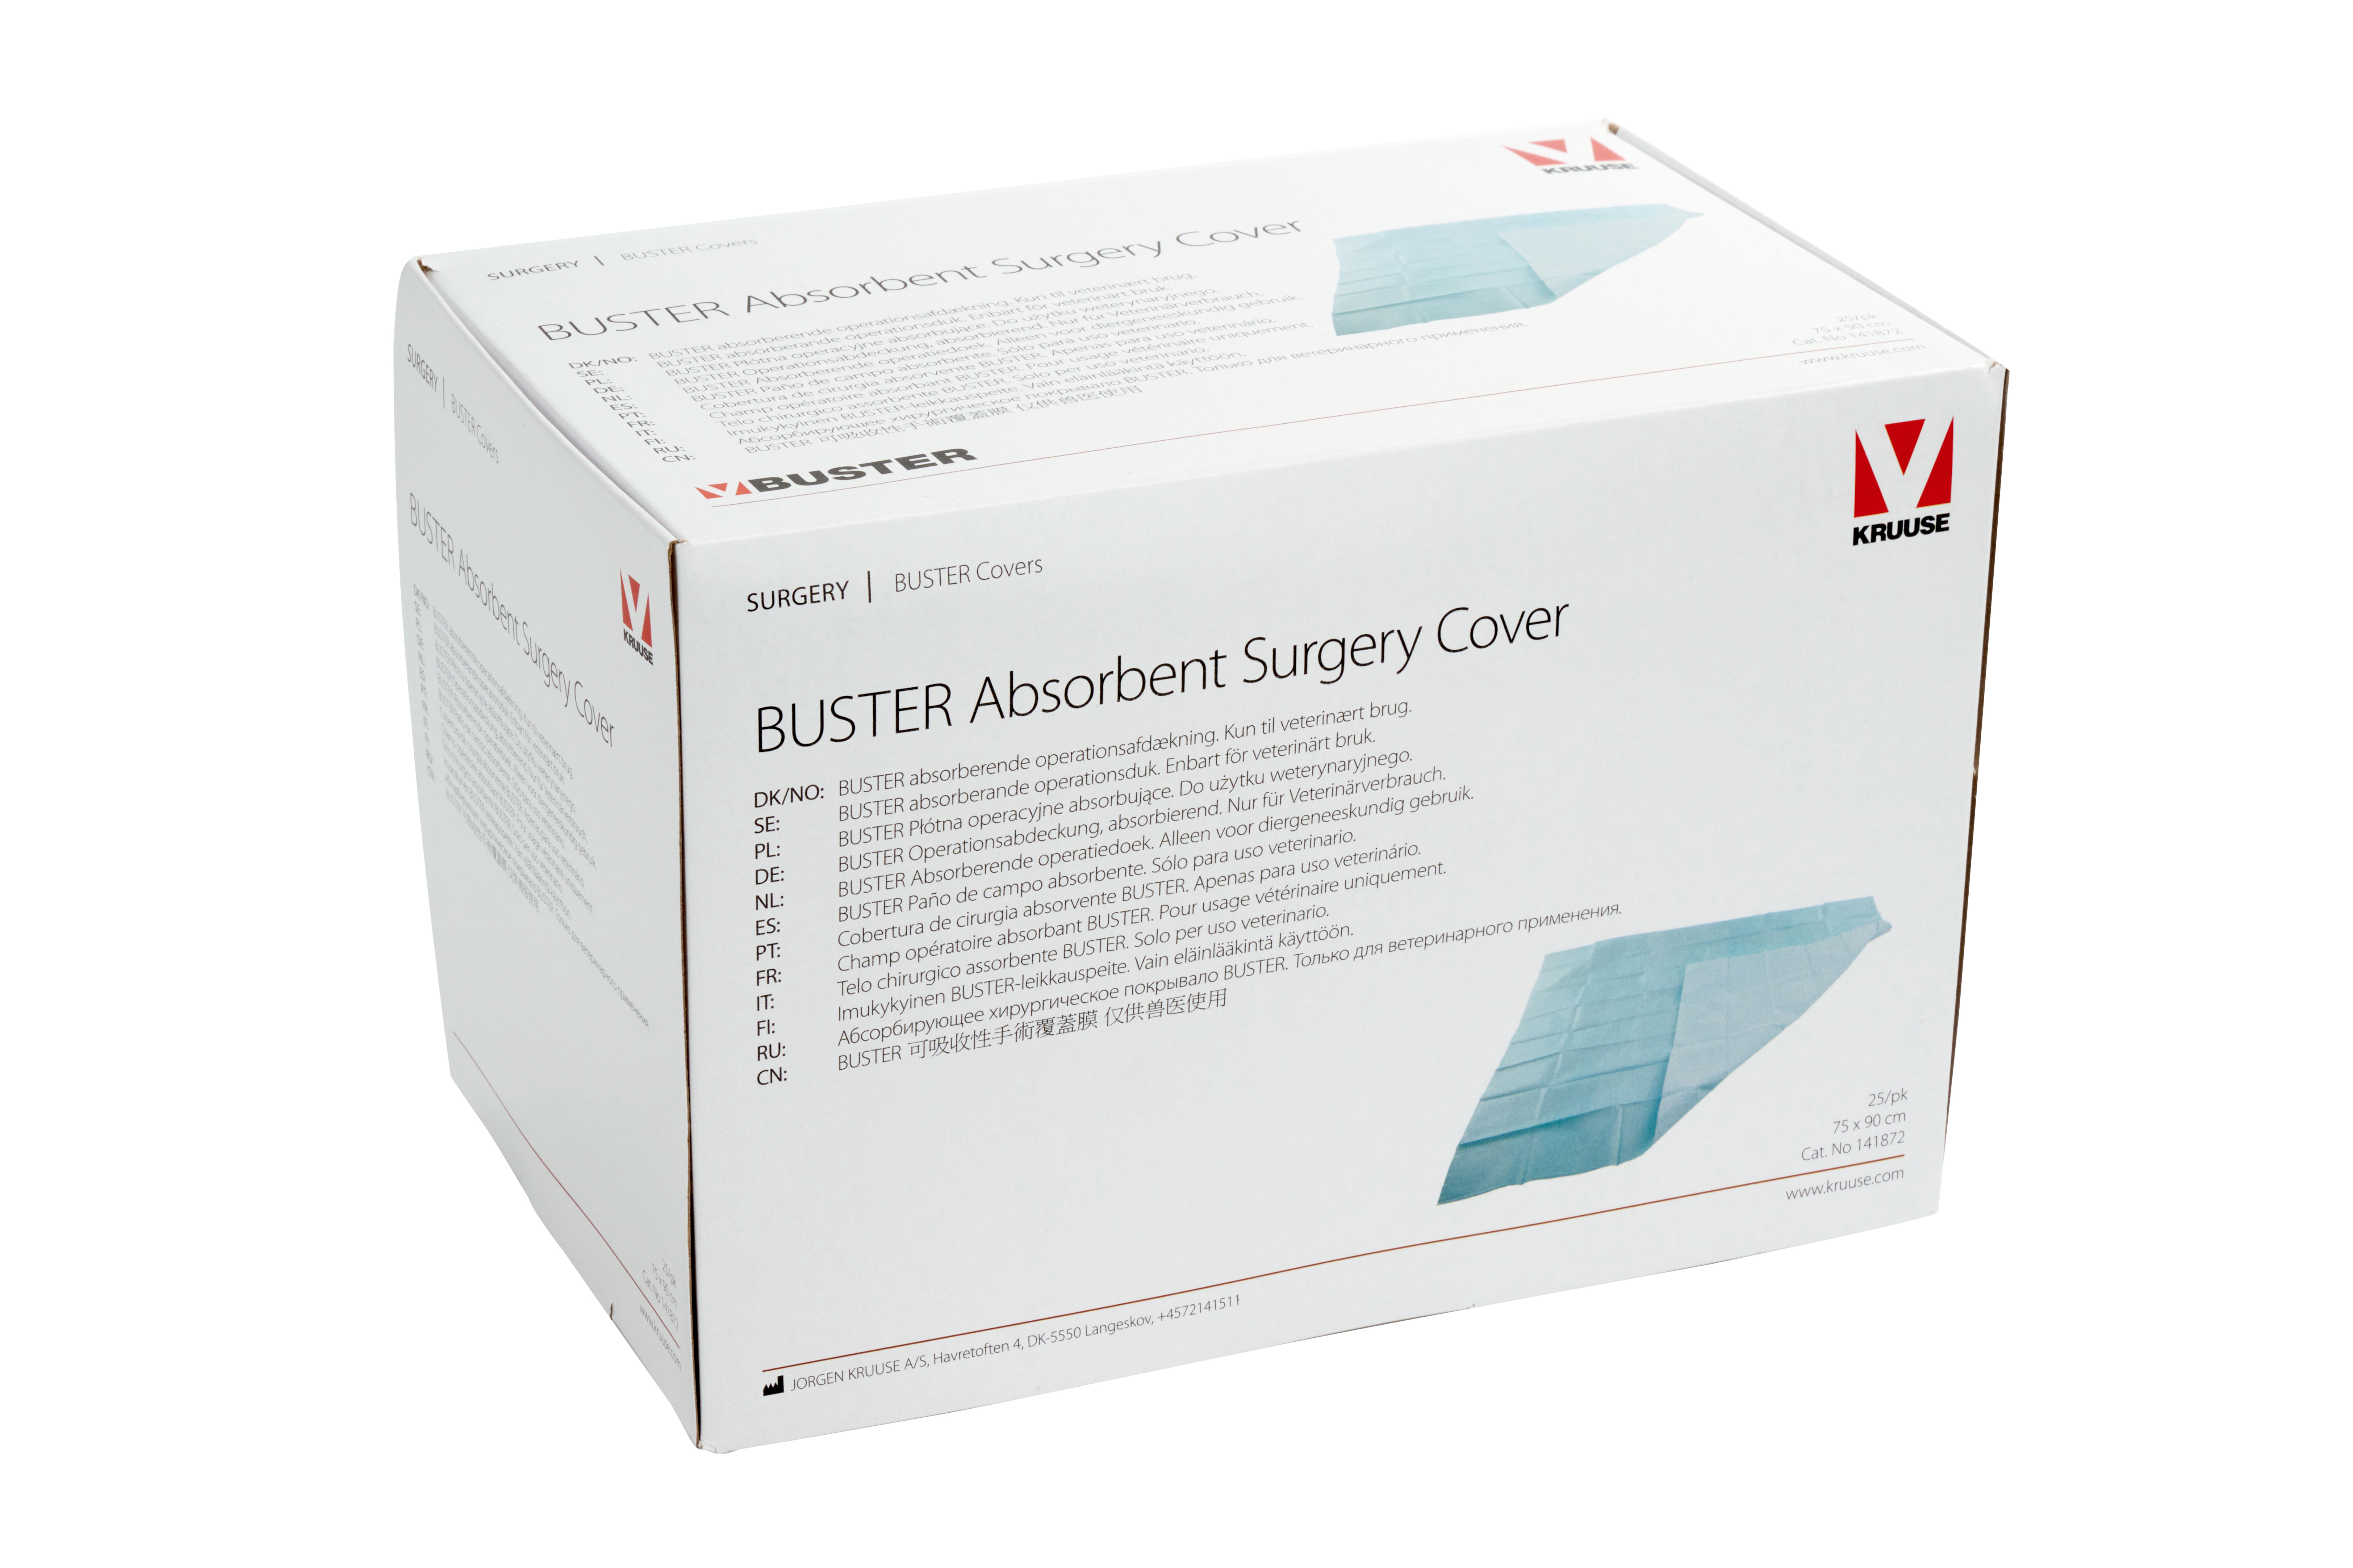 BUSTER Absorbent Surgery Cover, 75 x 90 cm, 25/pk